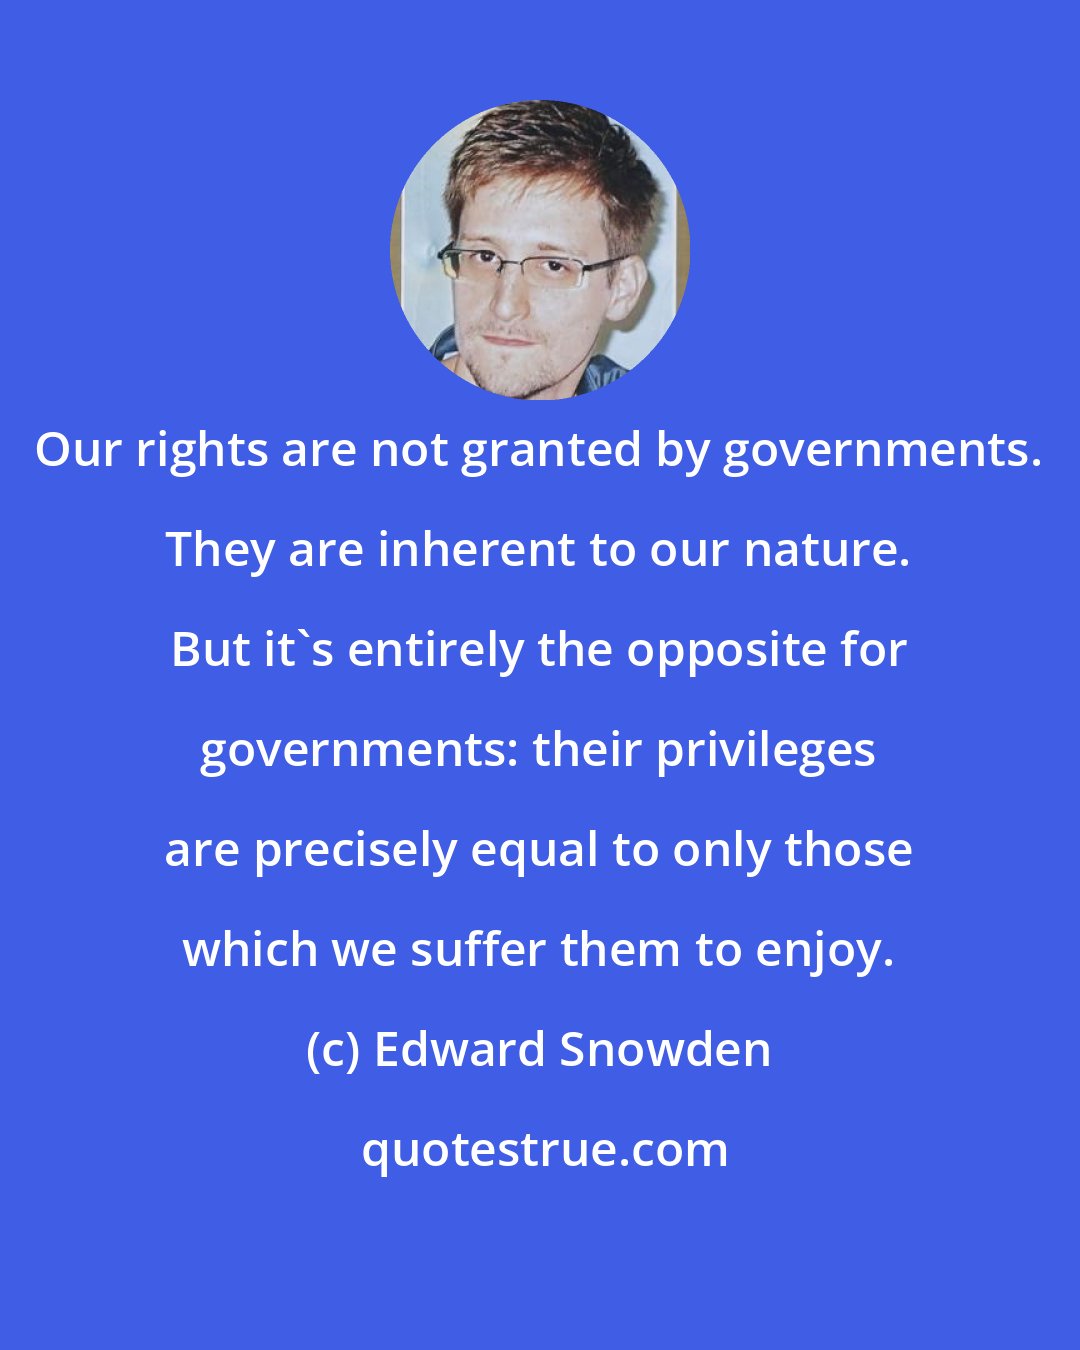 Edward Snowden: Our rights are not granted by governments. They are inherent to our nature. But it's entirely the opposite for governments: their privileges are precisely equal to only those which we suffer them to enjoy.